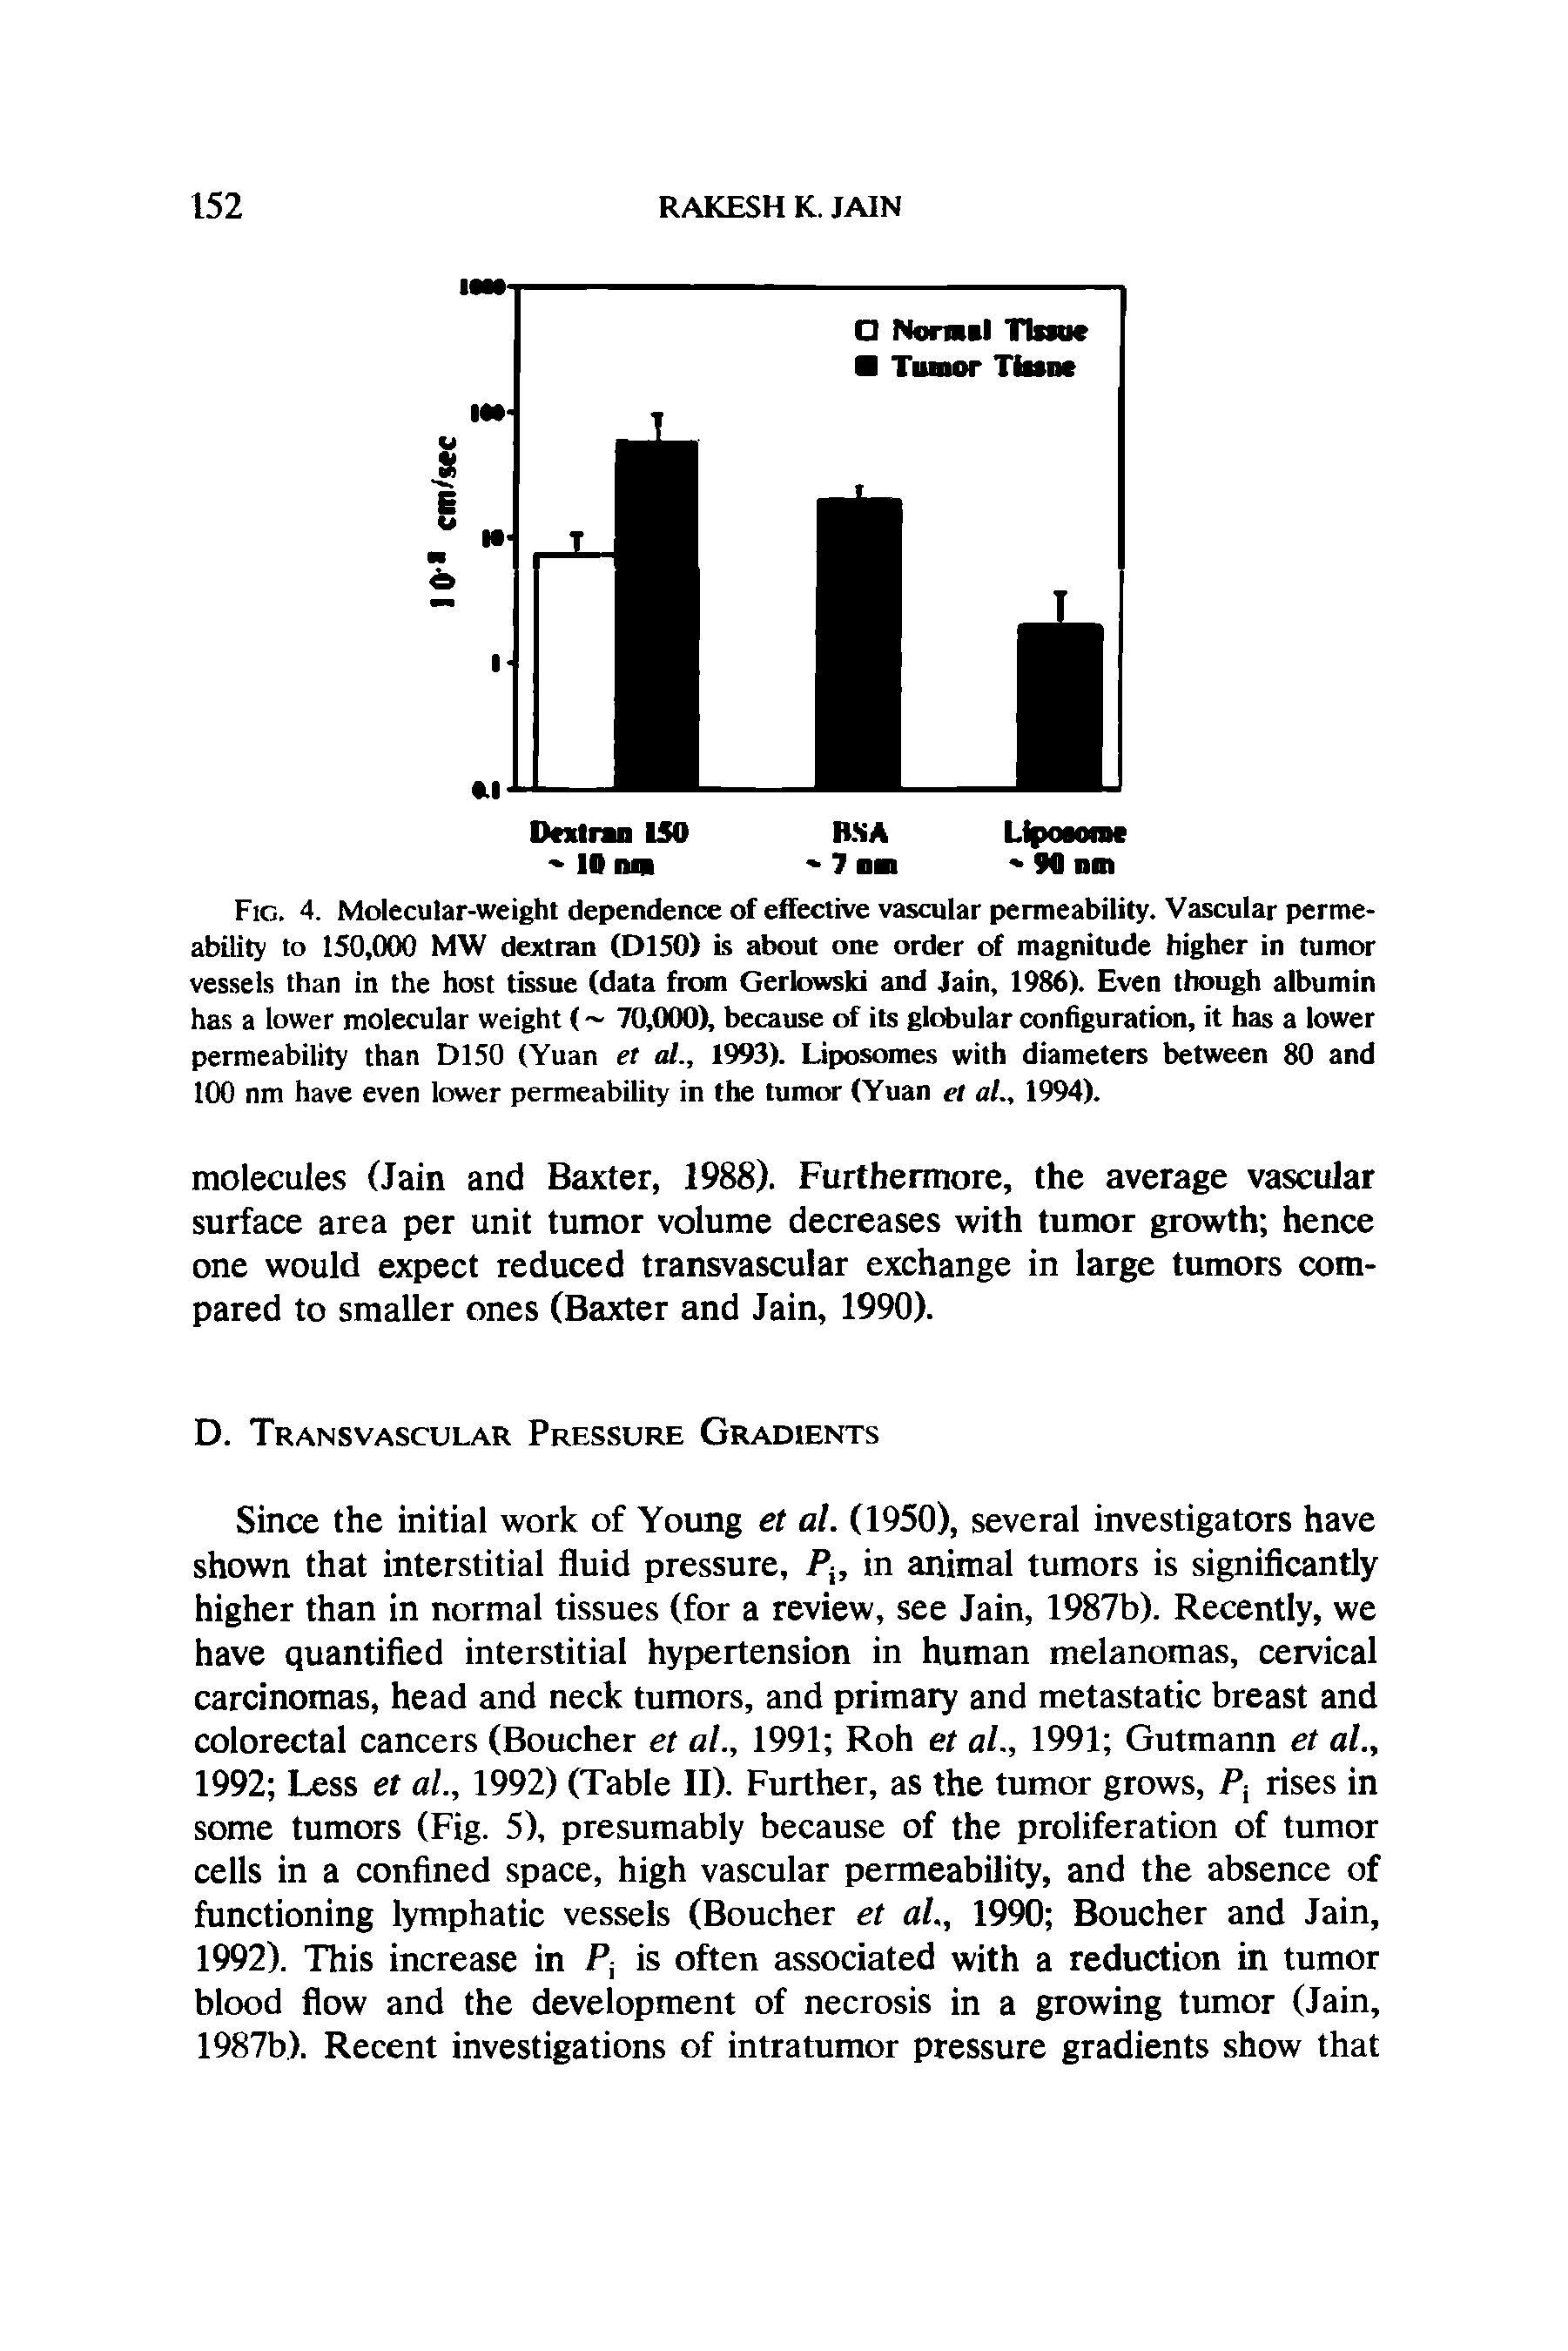 Fig. 4. Molecular-weight dependence of effective vascular permeability. Vascular permeability to 150,000 MW dextran (D150) is about one order of magnitude higher in tumor vessels than in the host tissue (data from Gerlowski and Jain, 1986). Even though albumin has a lower molecular weight ( 70,000), because of its globular configuration, it has a lower permeability than D150 (Yuan et al., 1993). Liposomes with diameters between 80 and 100 nm have even lower permeability in the tumor (Yuan et al., 1994).